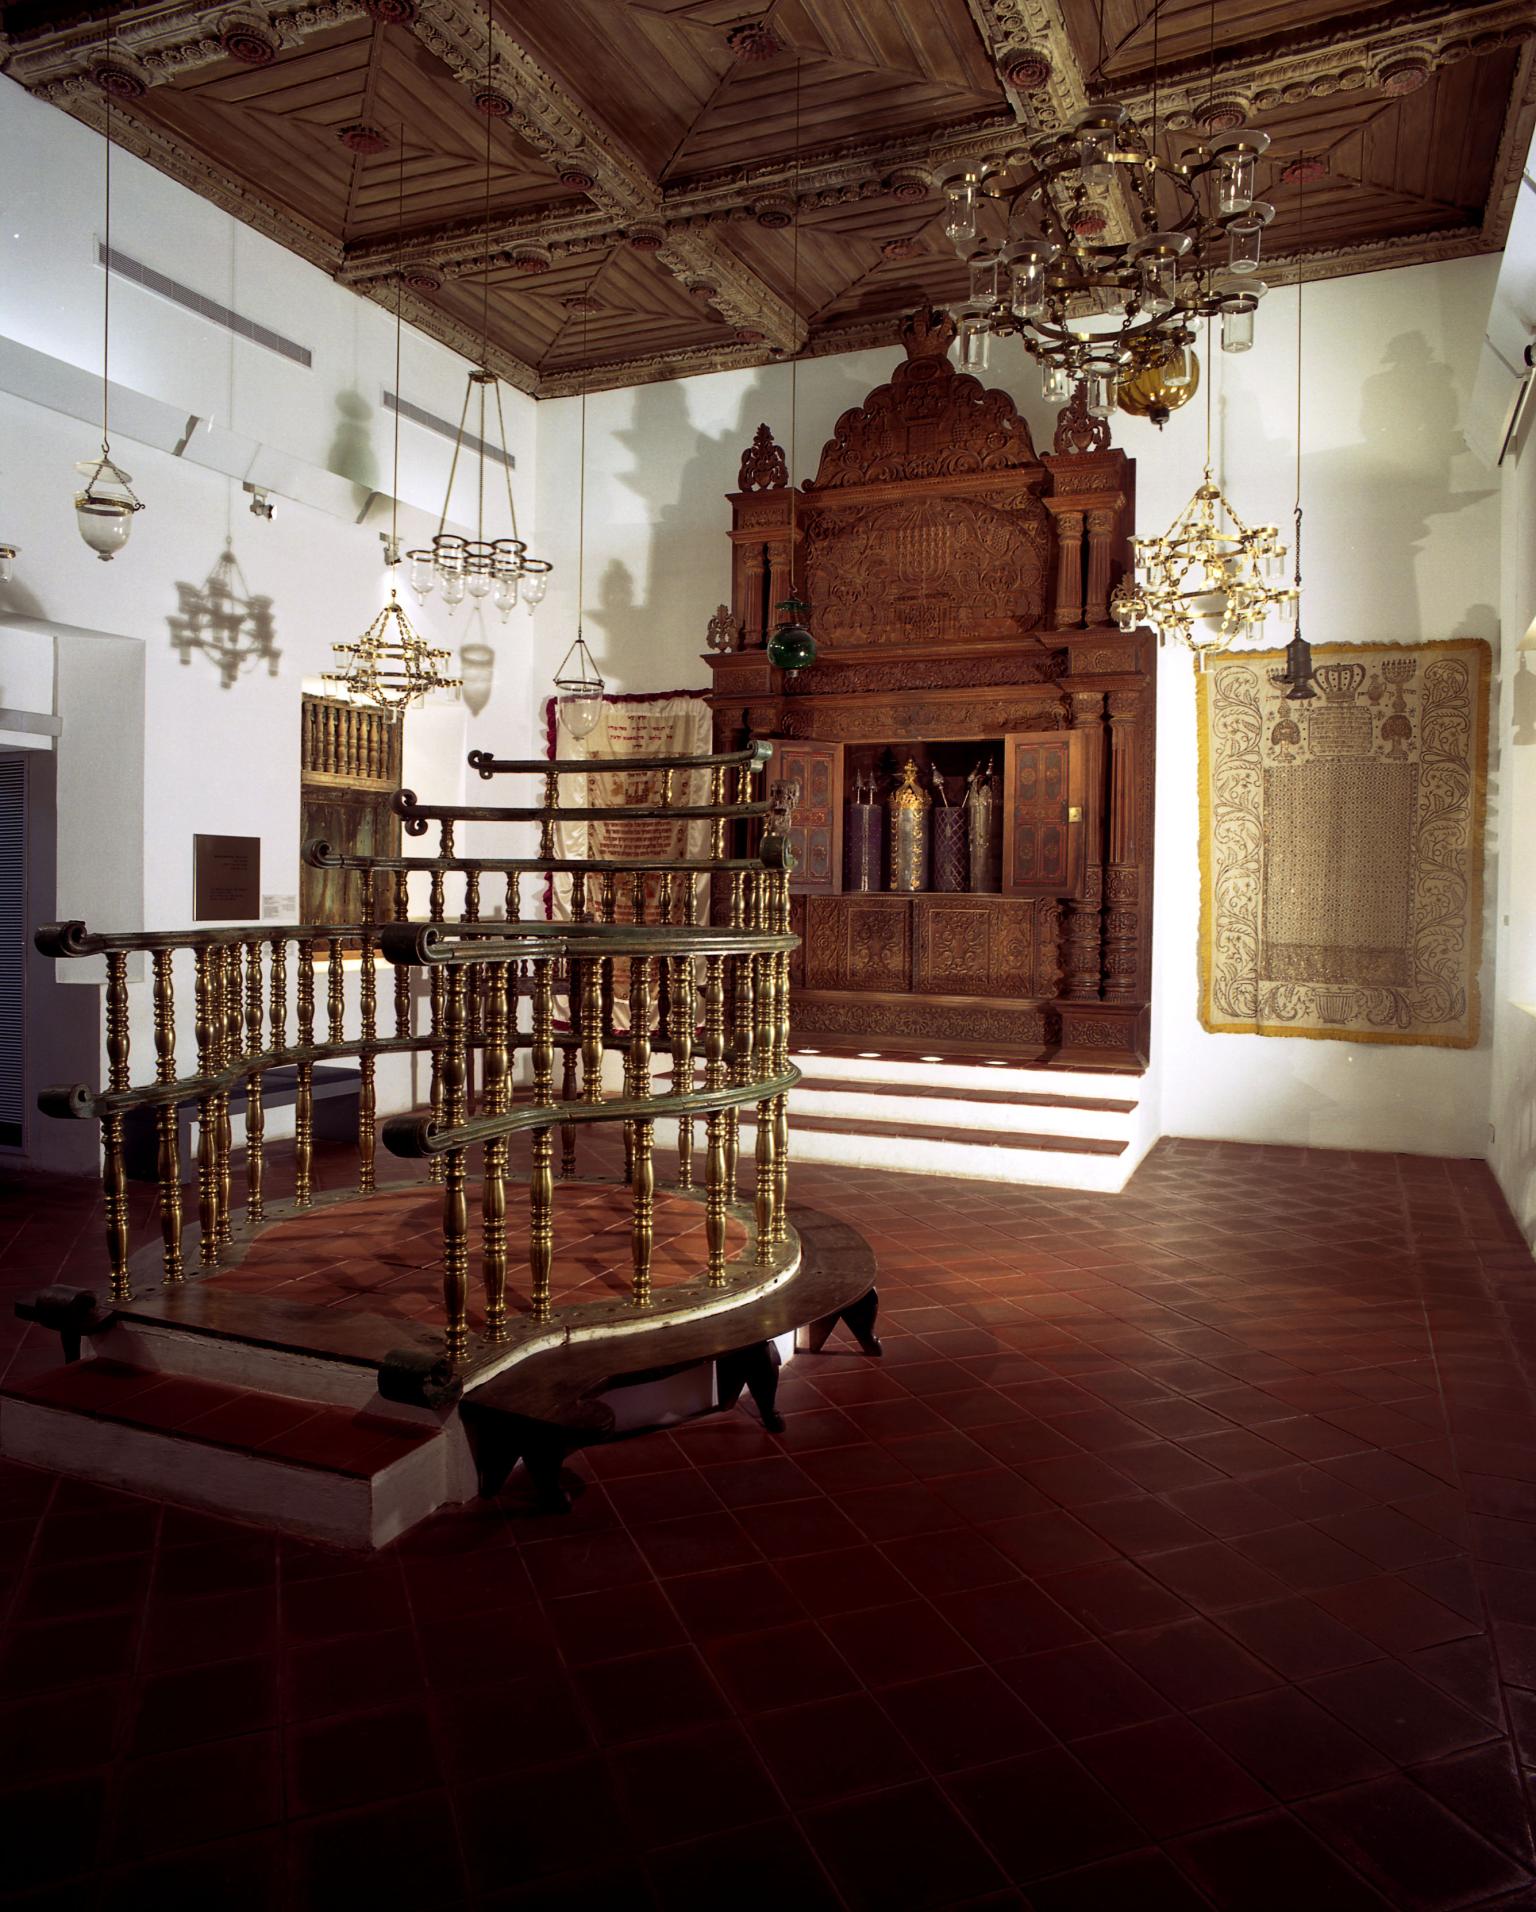 Photograph of room with raised wood platform in middle and wooden Torah ark in far wall.